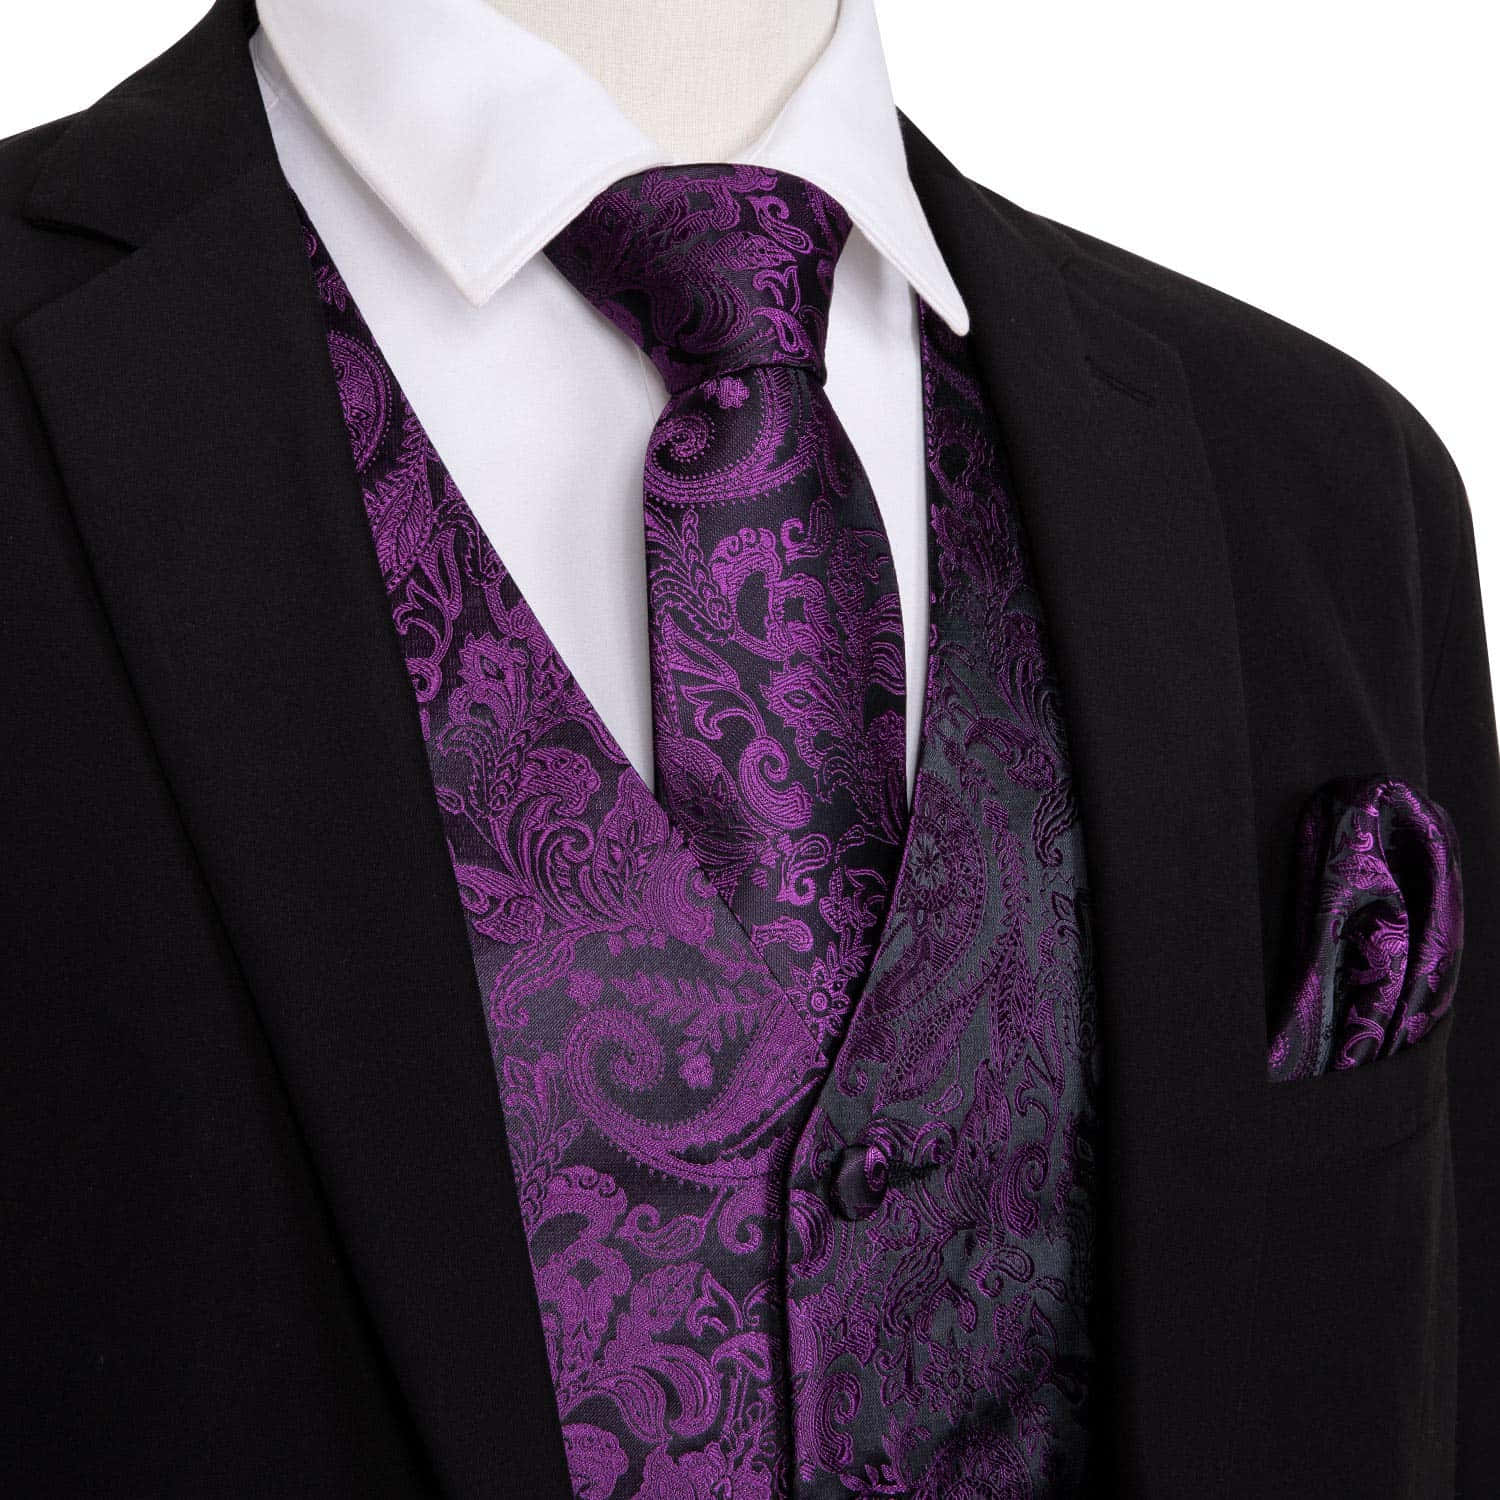 Be bold, be different with a Purple Tie Wallpaper